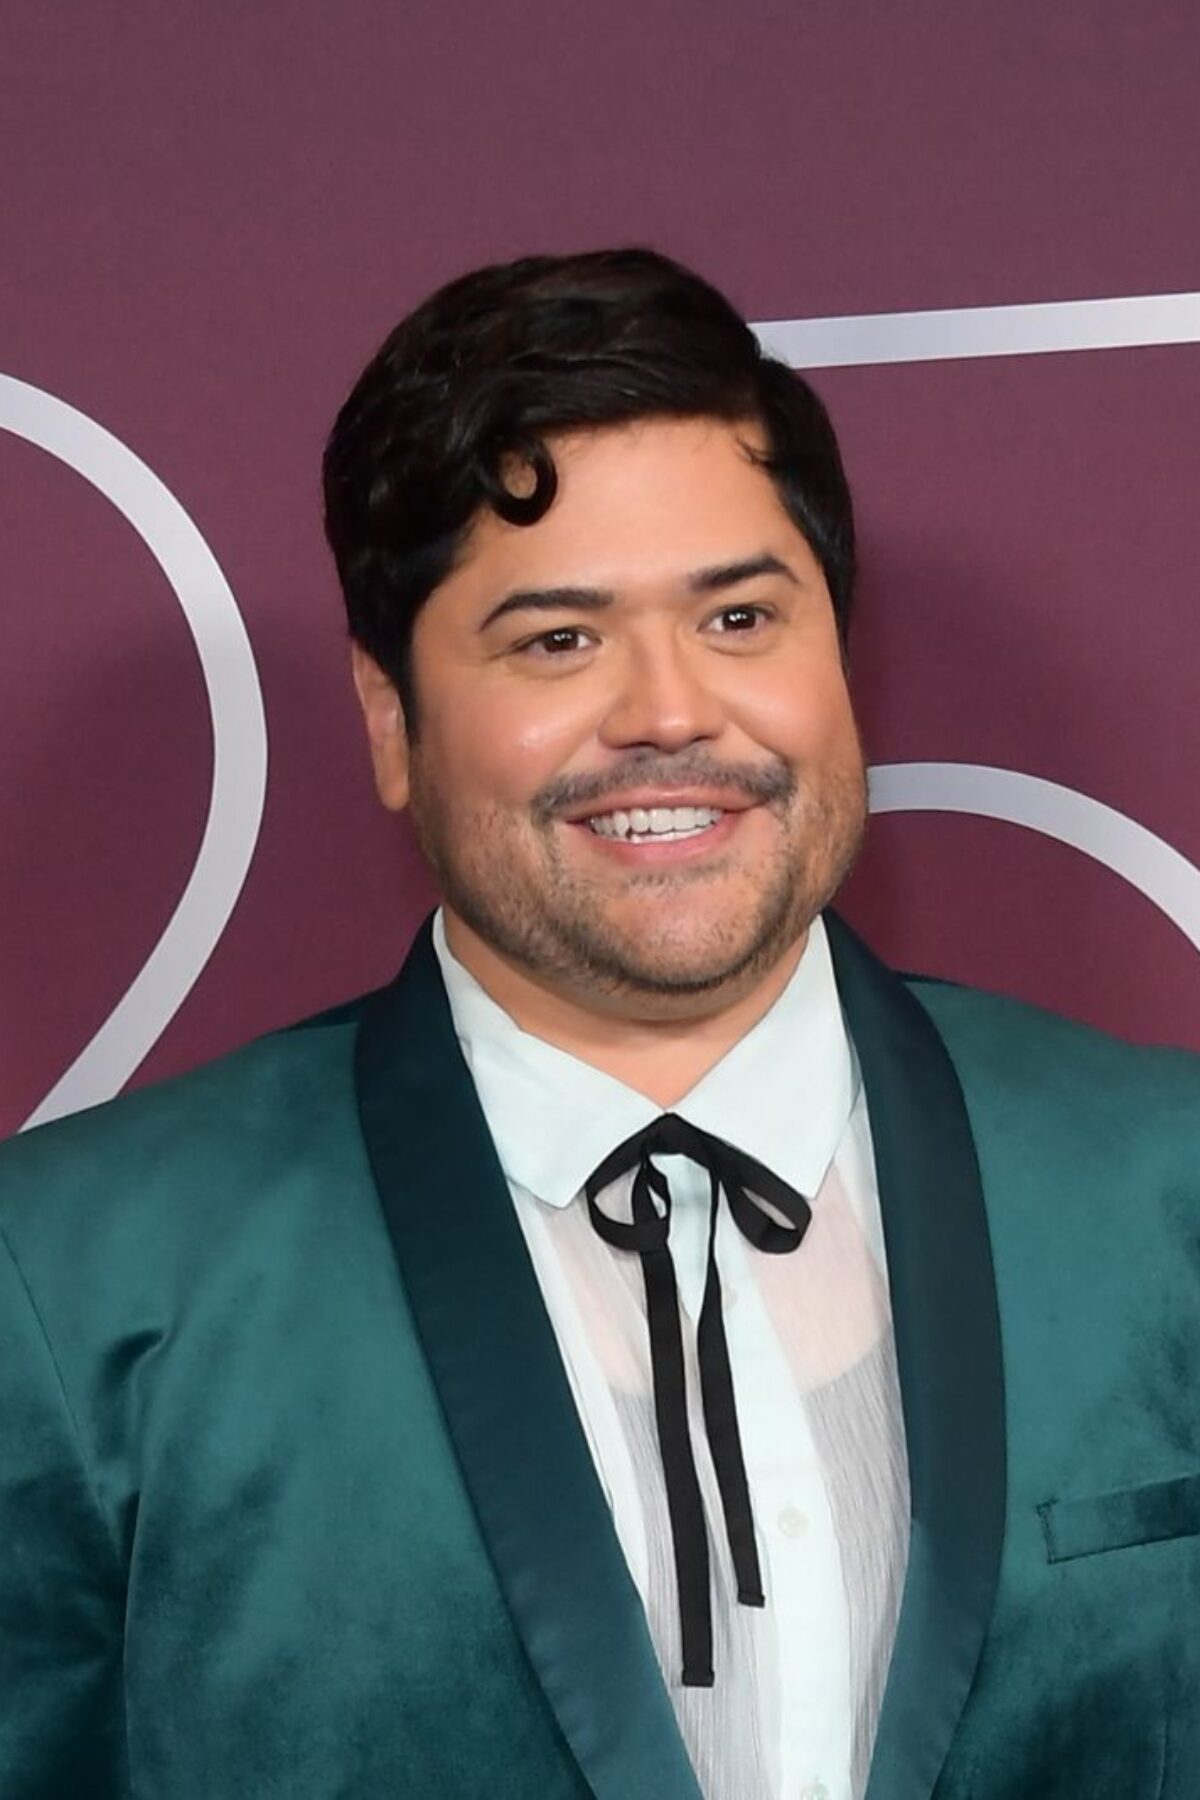 LOS ANGELES, CALIFORNIA - FEBRUARY 27: Harvey Guillen attends the 25th Annual Costume Designers Guild Awards - Arrivals at Fairmont Century Plaza on February 27, 2023 in Los Angeles, California. (Photo by Unique Nicole/FilmMagic)